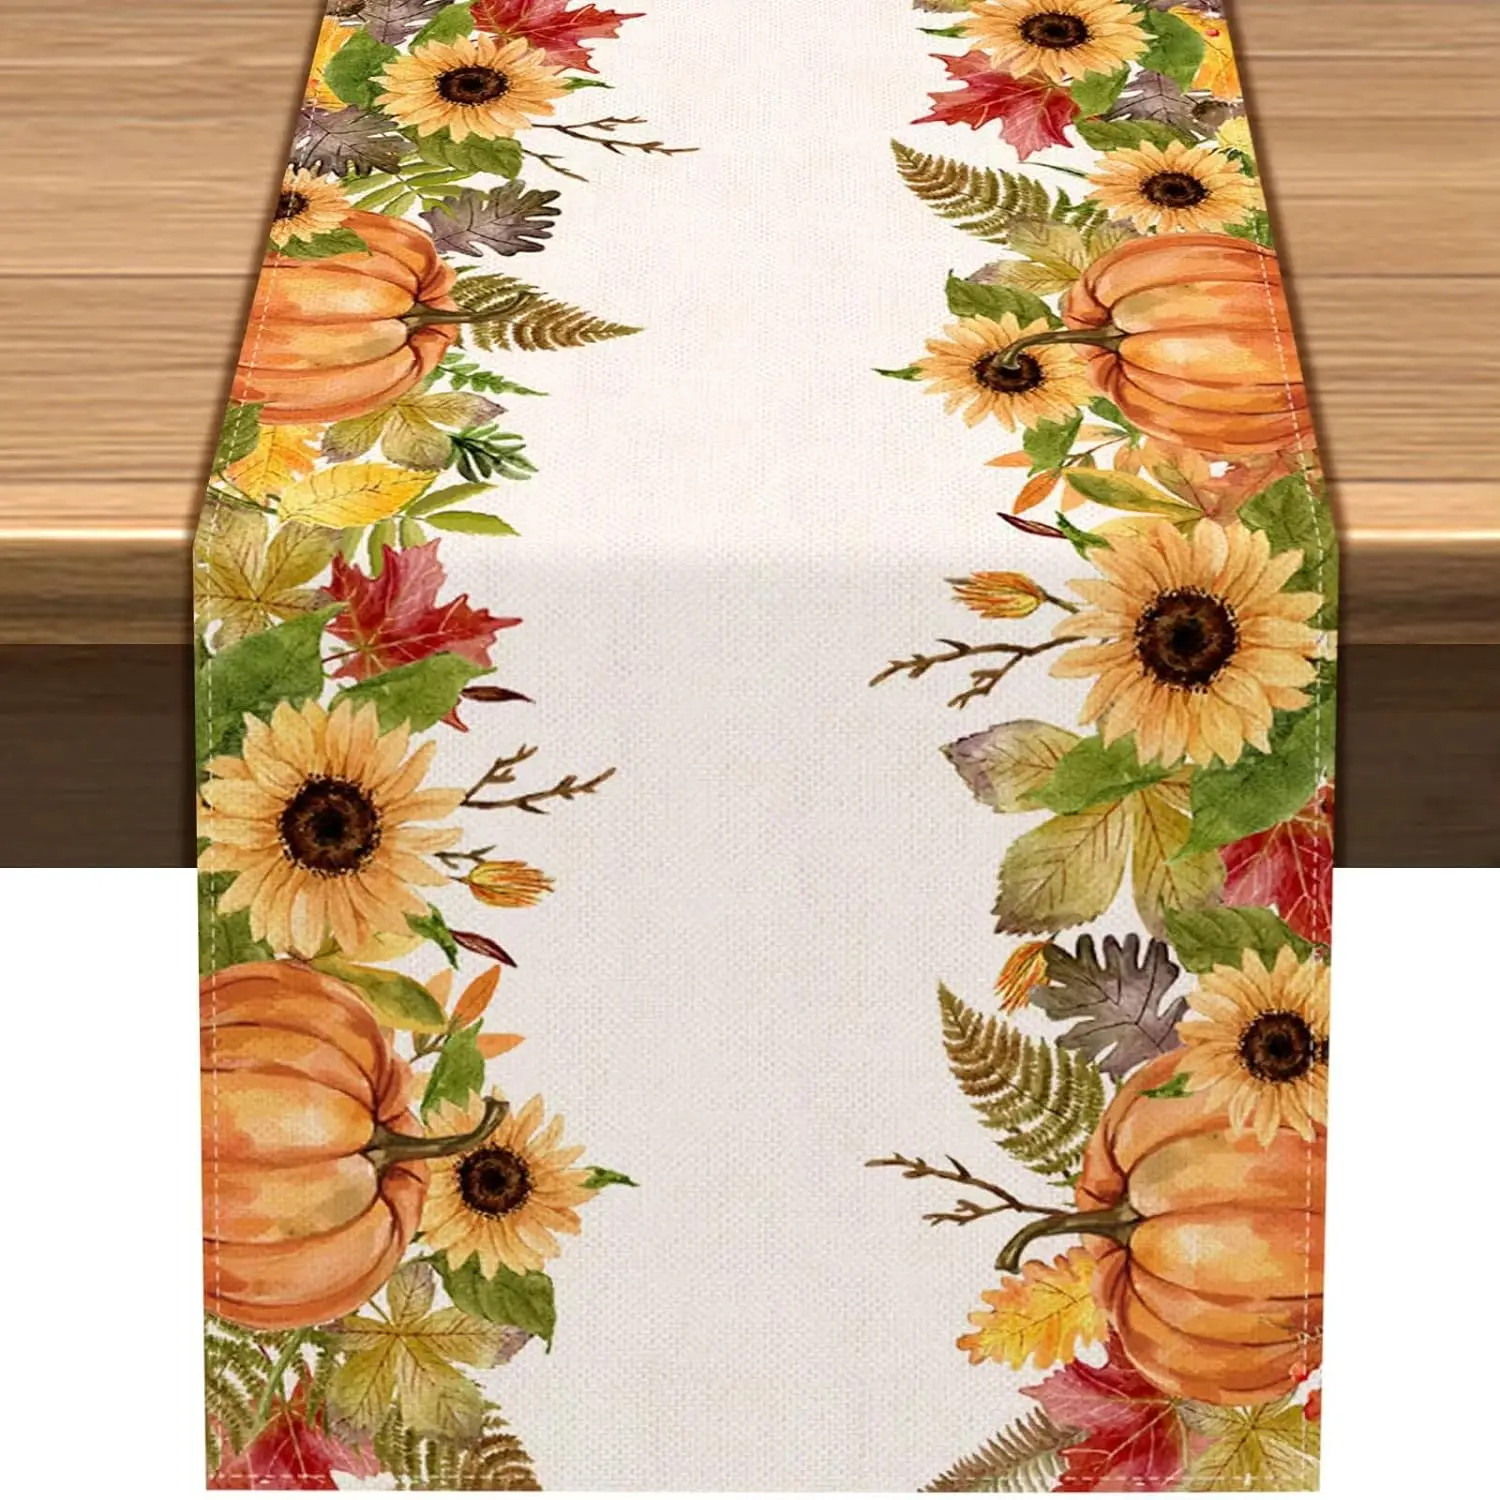 

Pumpkin Sunflower Fall Linen Table Runners Autumn Maple Leaves Kitchen Dining Table Decor Farmhouse Holiday Wedding Party Decor